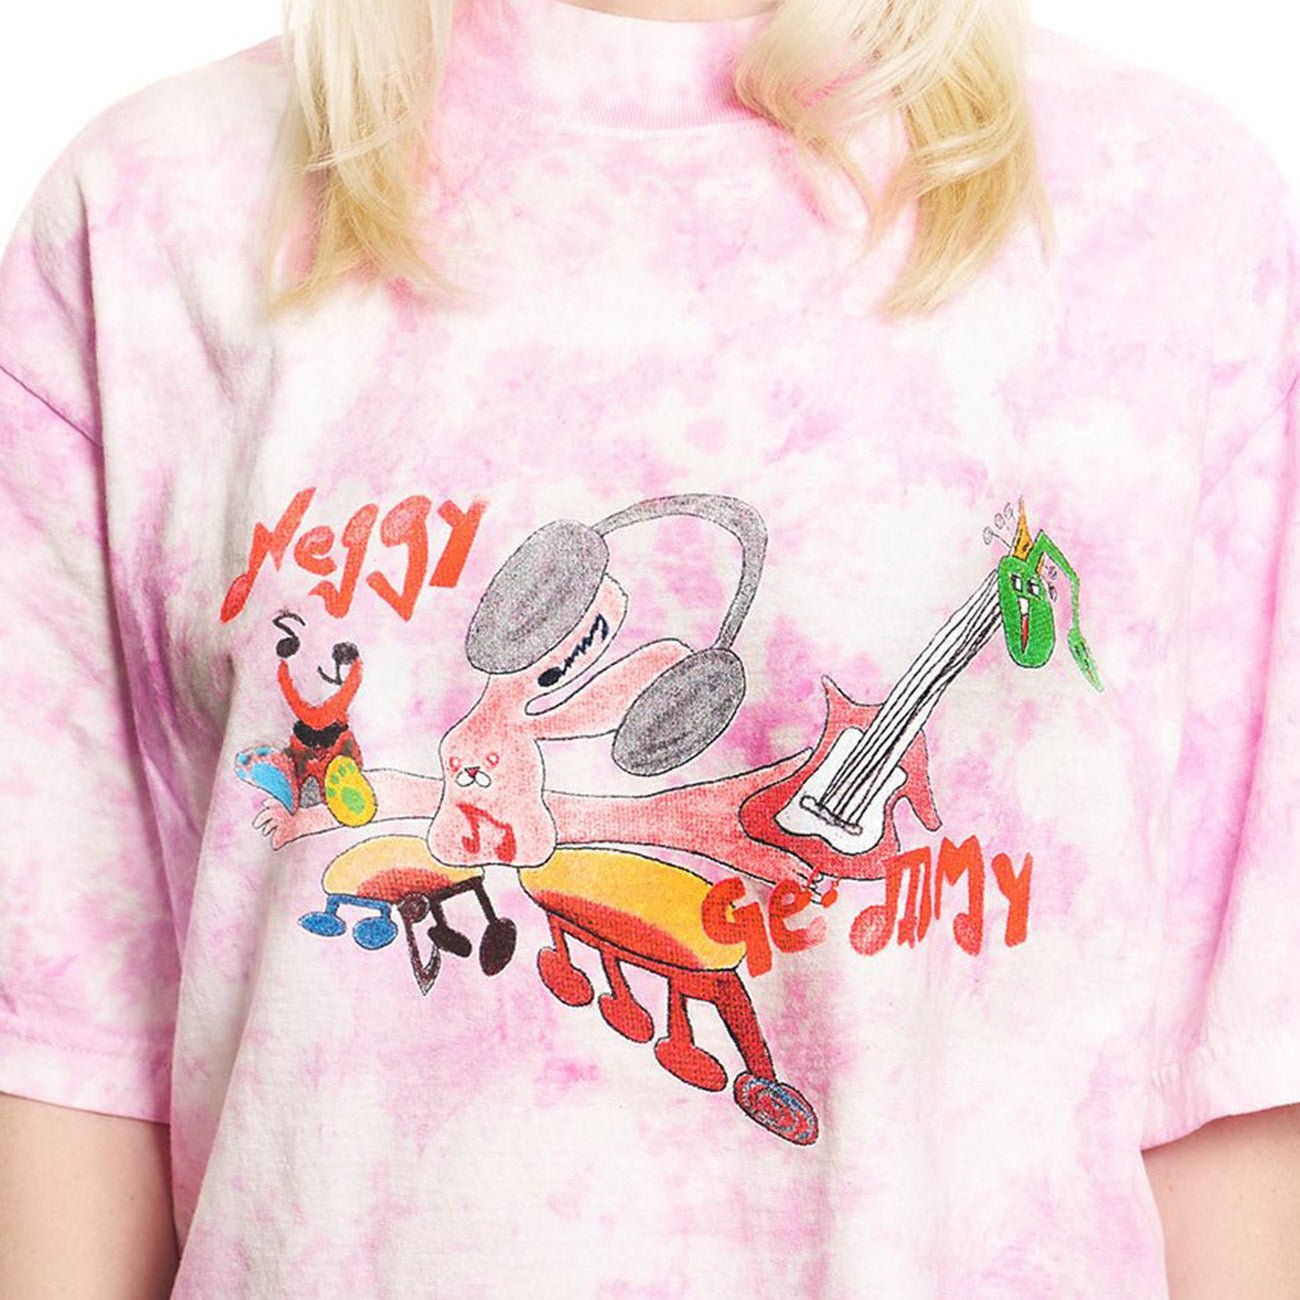 Neggy Gemmy - Pink Tie Dye T-Shirt - 100% Electronica Official Store (Photo 2)